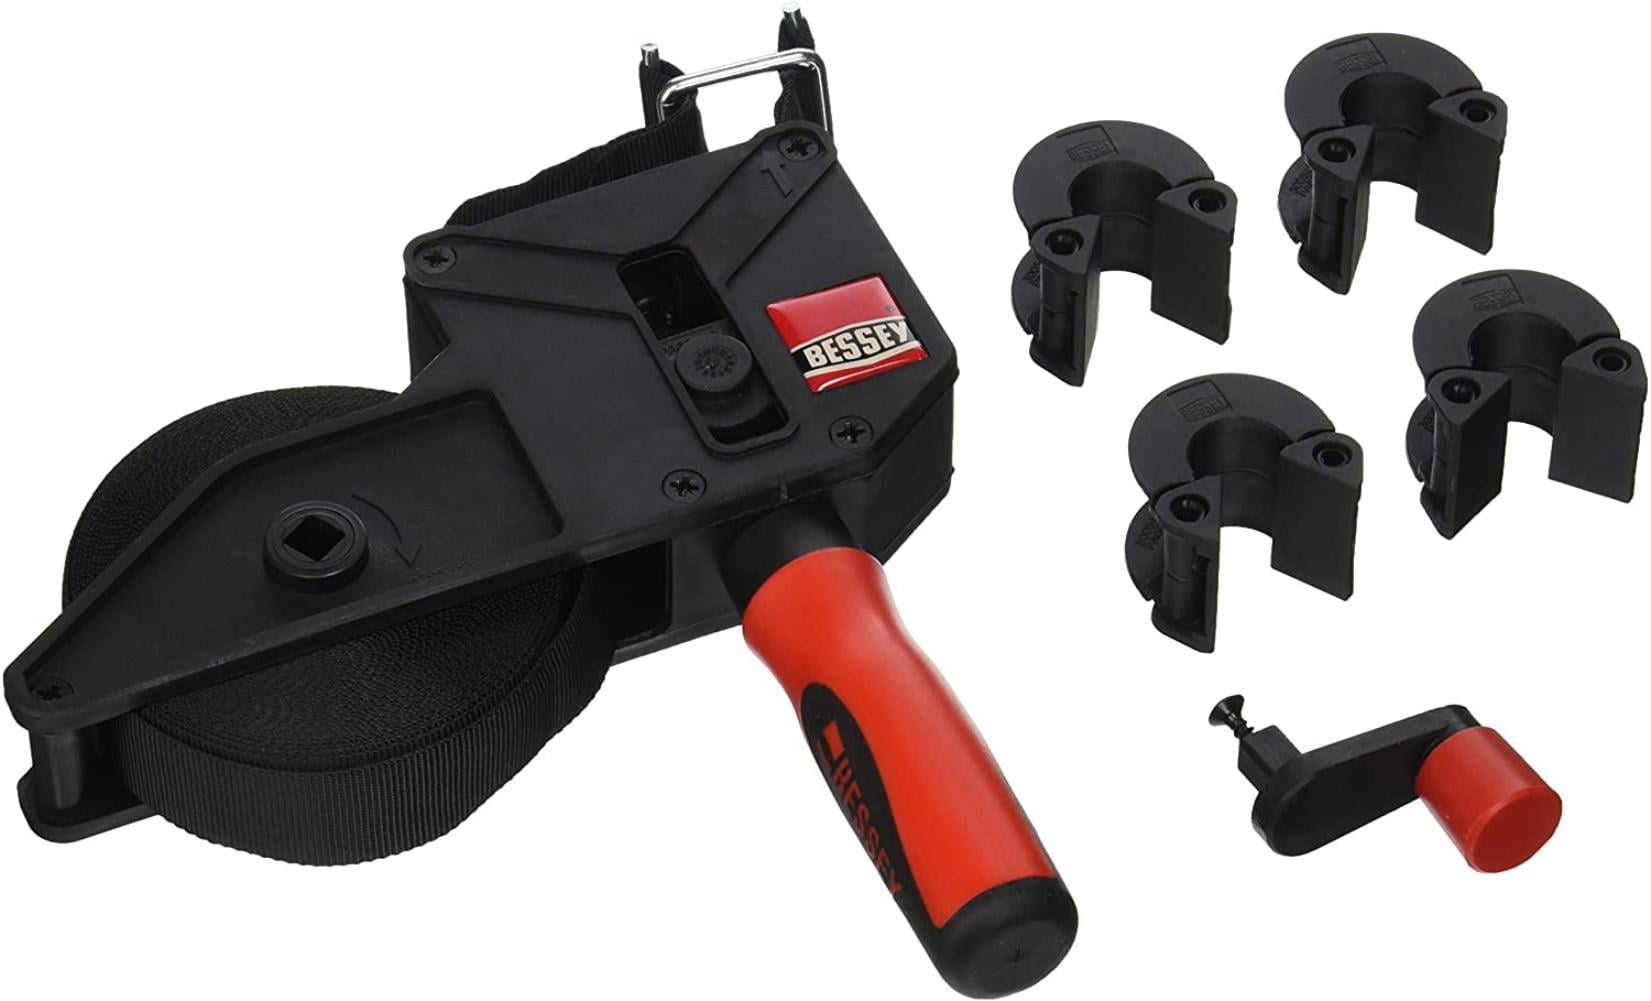 Bessey VAS-23+2K Variable Angle Strap Clamp with 4 Clips 23 Black with red Handle